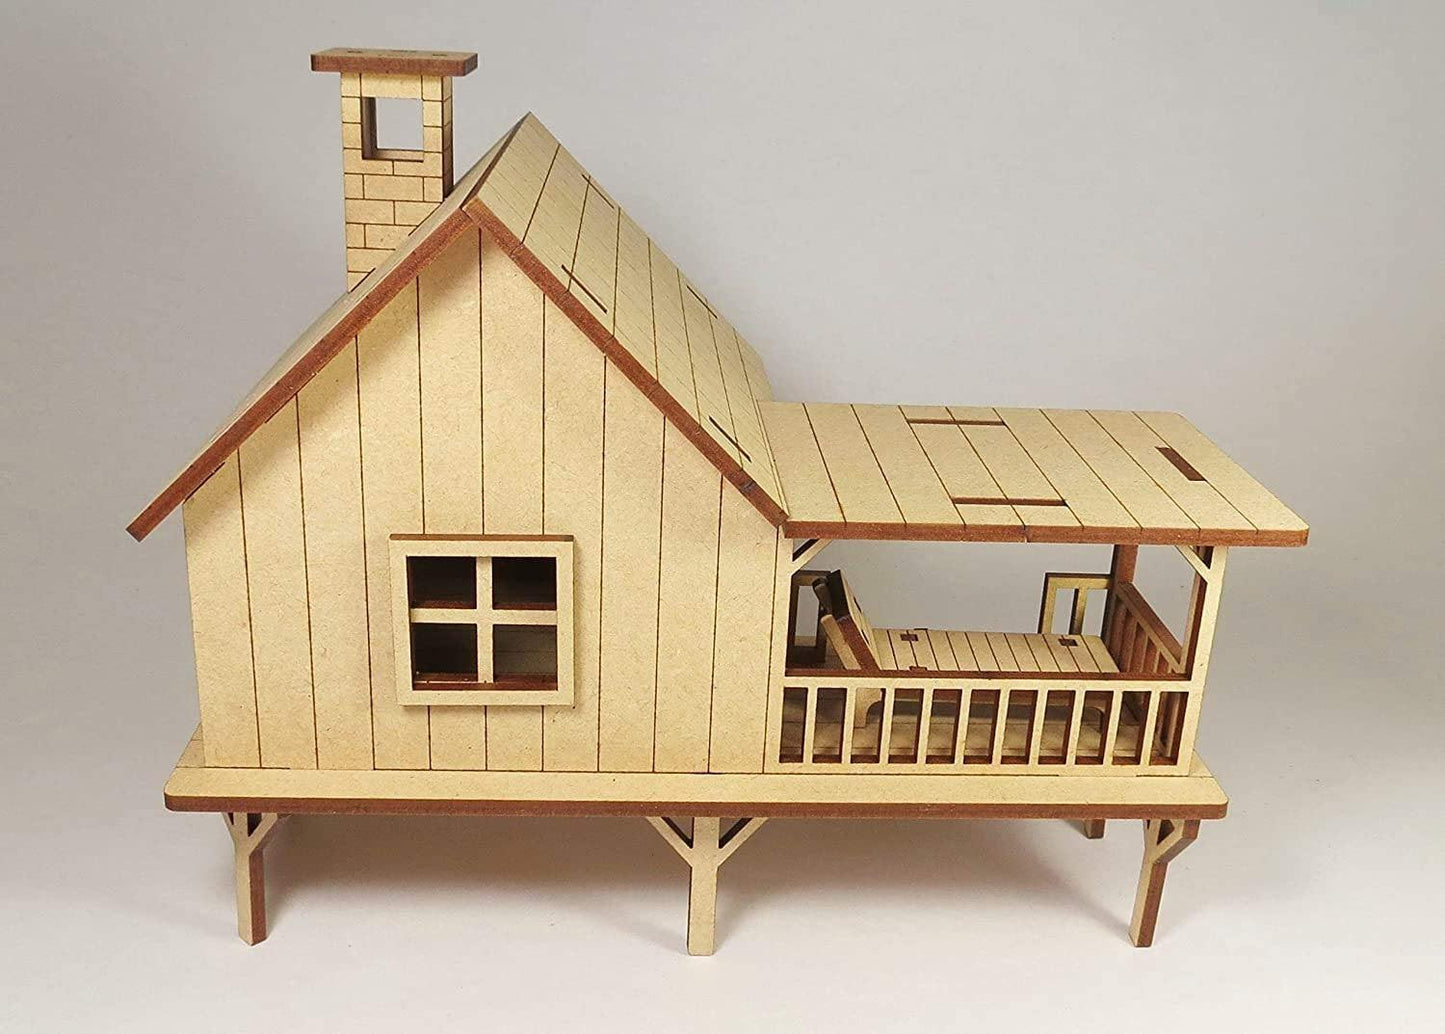 DIY Wooden Doll House Kit - DIY Beach House Miniature - Farm House - 3D Wooden Puzzle - Construction Toy, Modeling Kit - Easy to Assemble